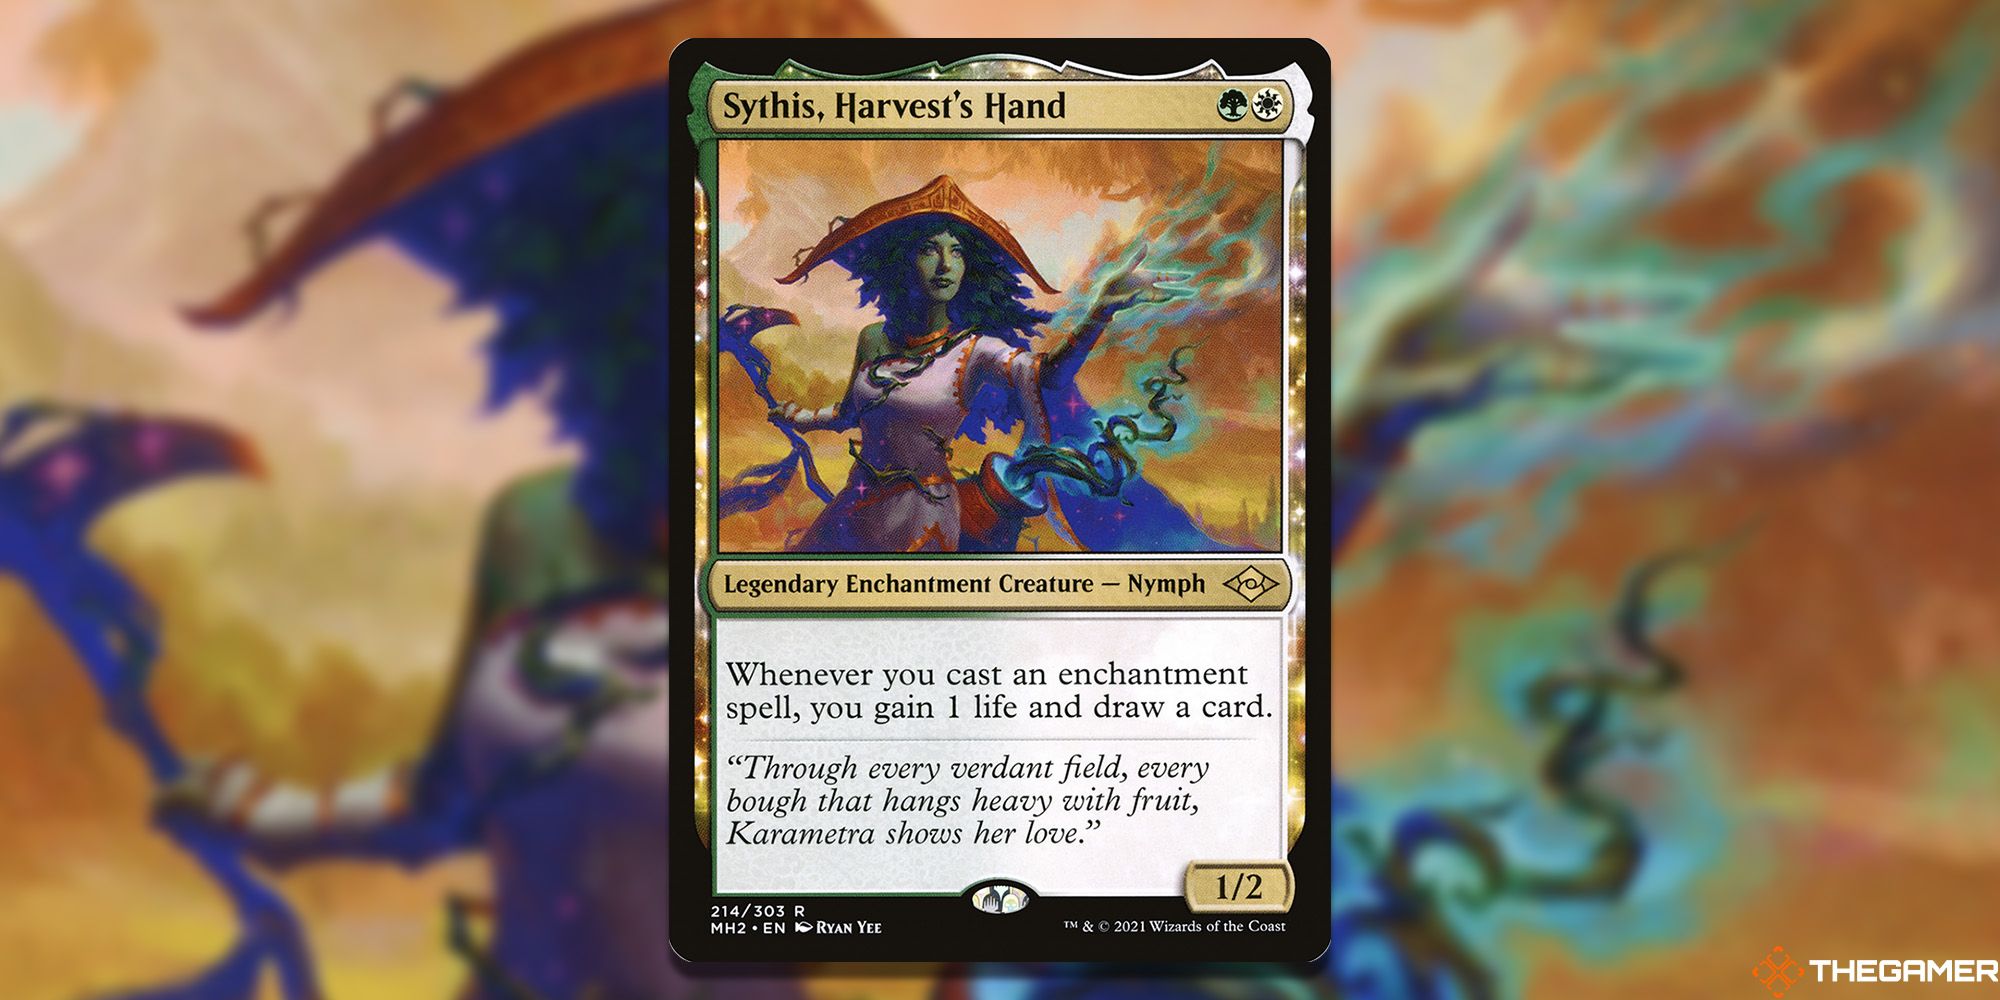 Image of the sythis, harvest's hand card in Magic: The Gathering, with art by Ryan Yee